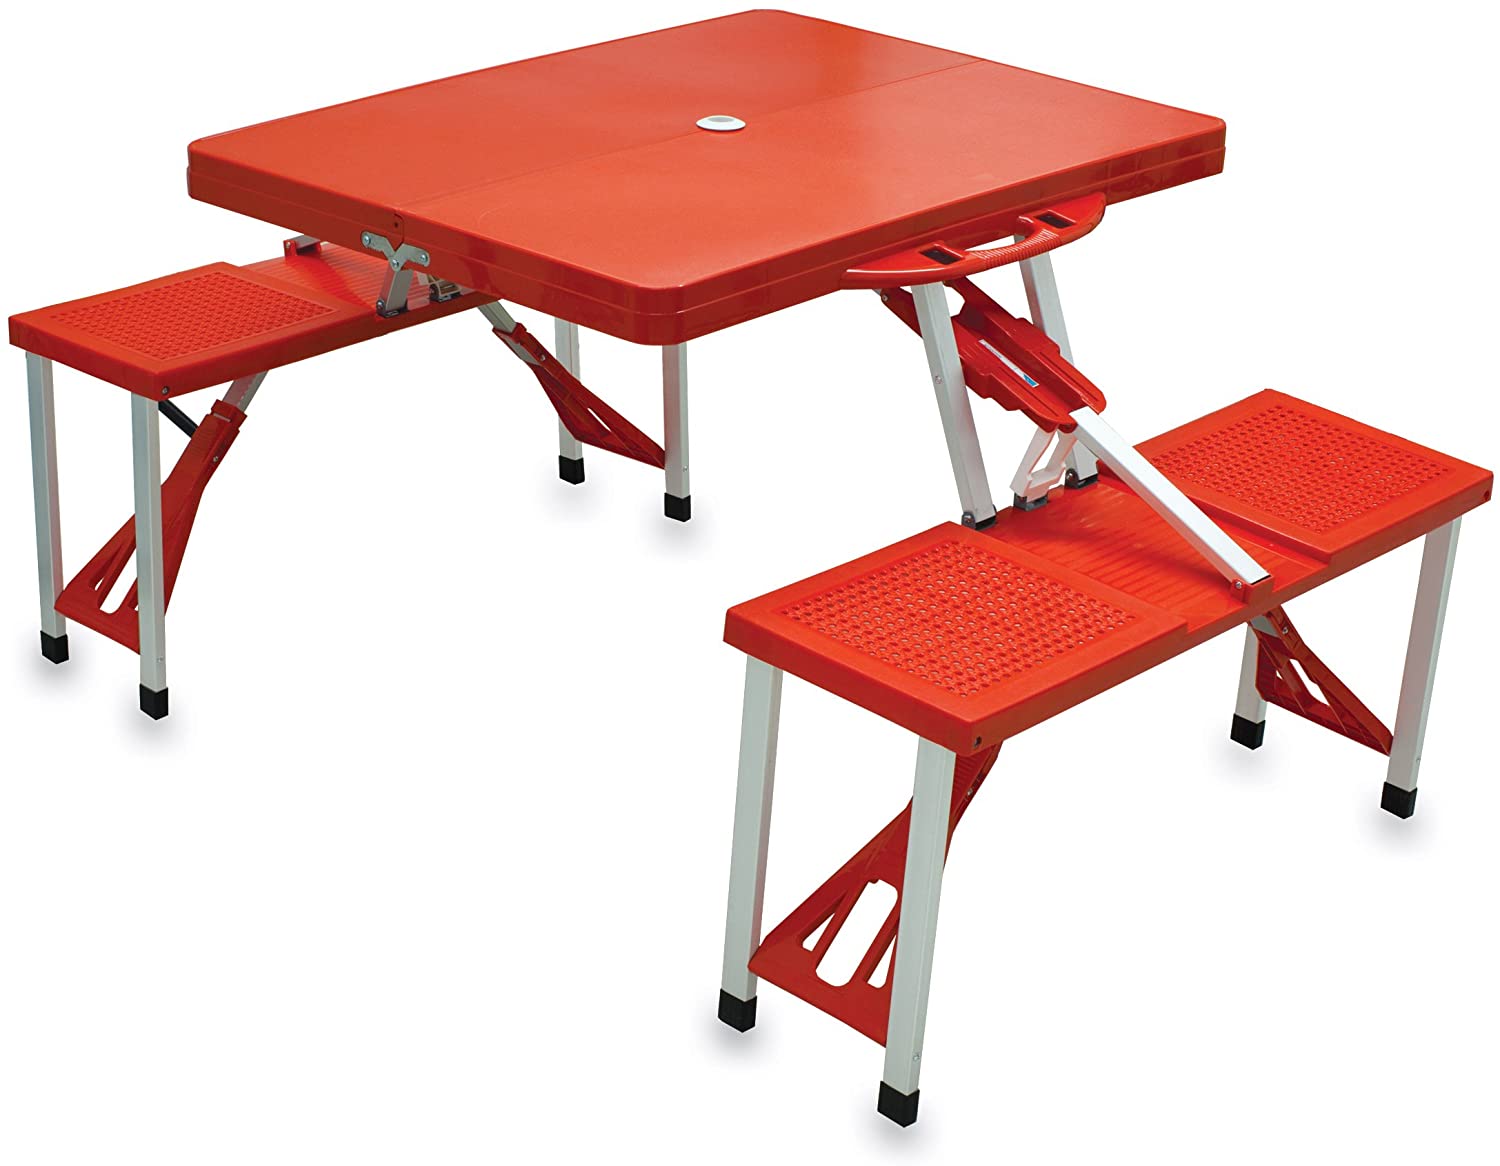 Portable Folding Picnic Table With Umbrella Hole Red Copy 